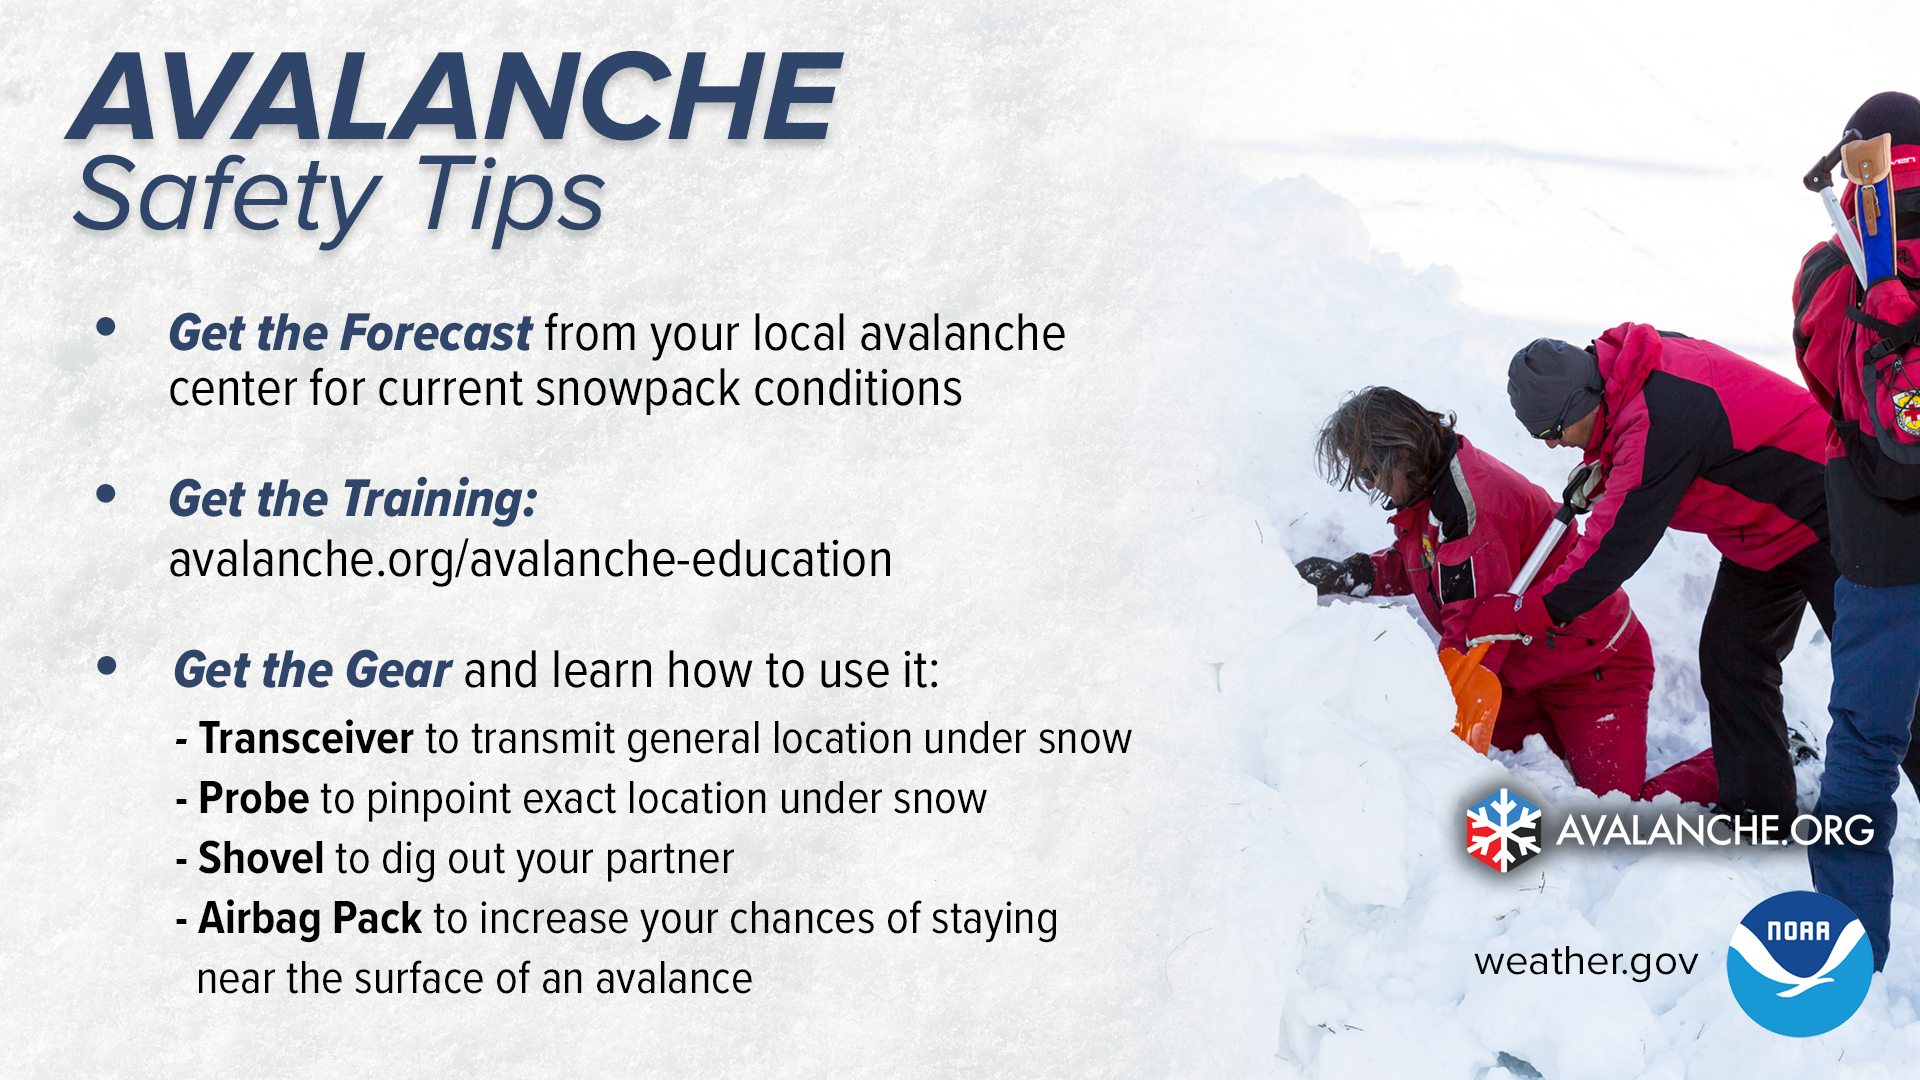 Avalanche Safety Tips. 1) Get the forecast from your local avalanche center for current snowpack conditions. 2) Get the training: avalanche.org/avalanche-education. 3) Get the Gear and learn how to use it. Transceiver to transmit general location under snow. Probe to pinpoint exact location uner snow. Shovel to dig out your partner. Airbag Pack to increase your chances of staying near the surface of an avalanche.